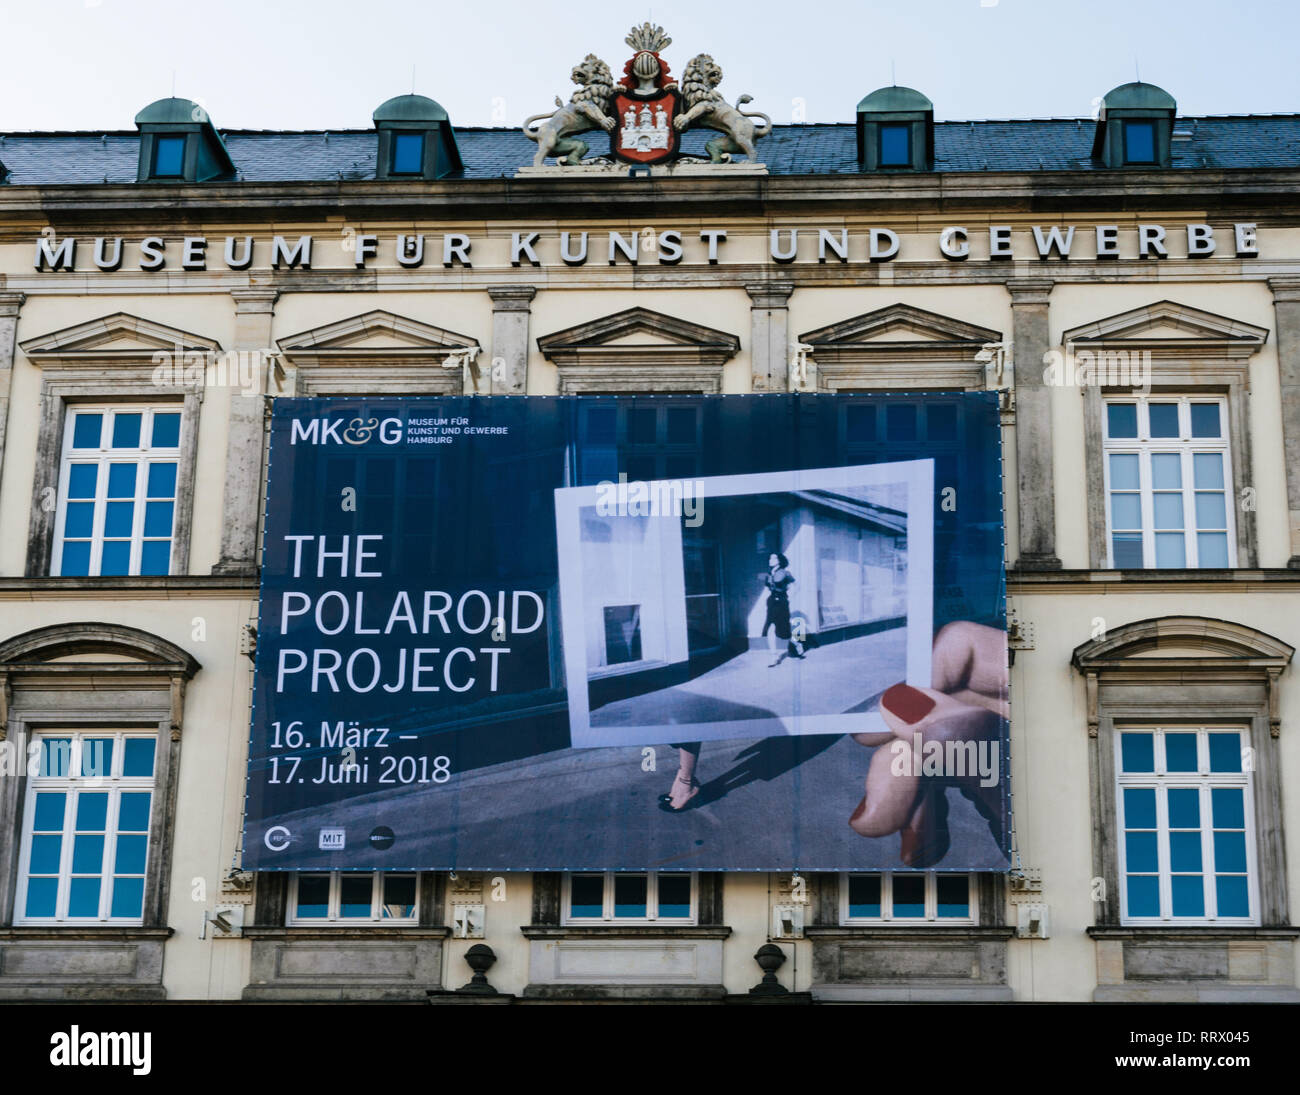 HAMBURG, GERMANY - MAR 20, 2018: Museum fur Kunst und Gewerbe facade with the Polaroid Project exhibition Stock Photo